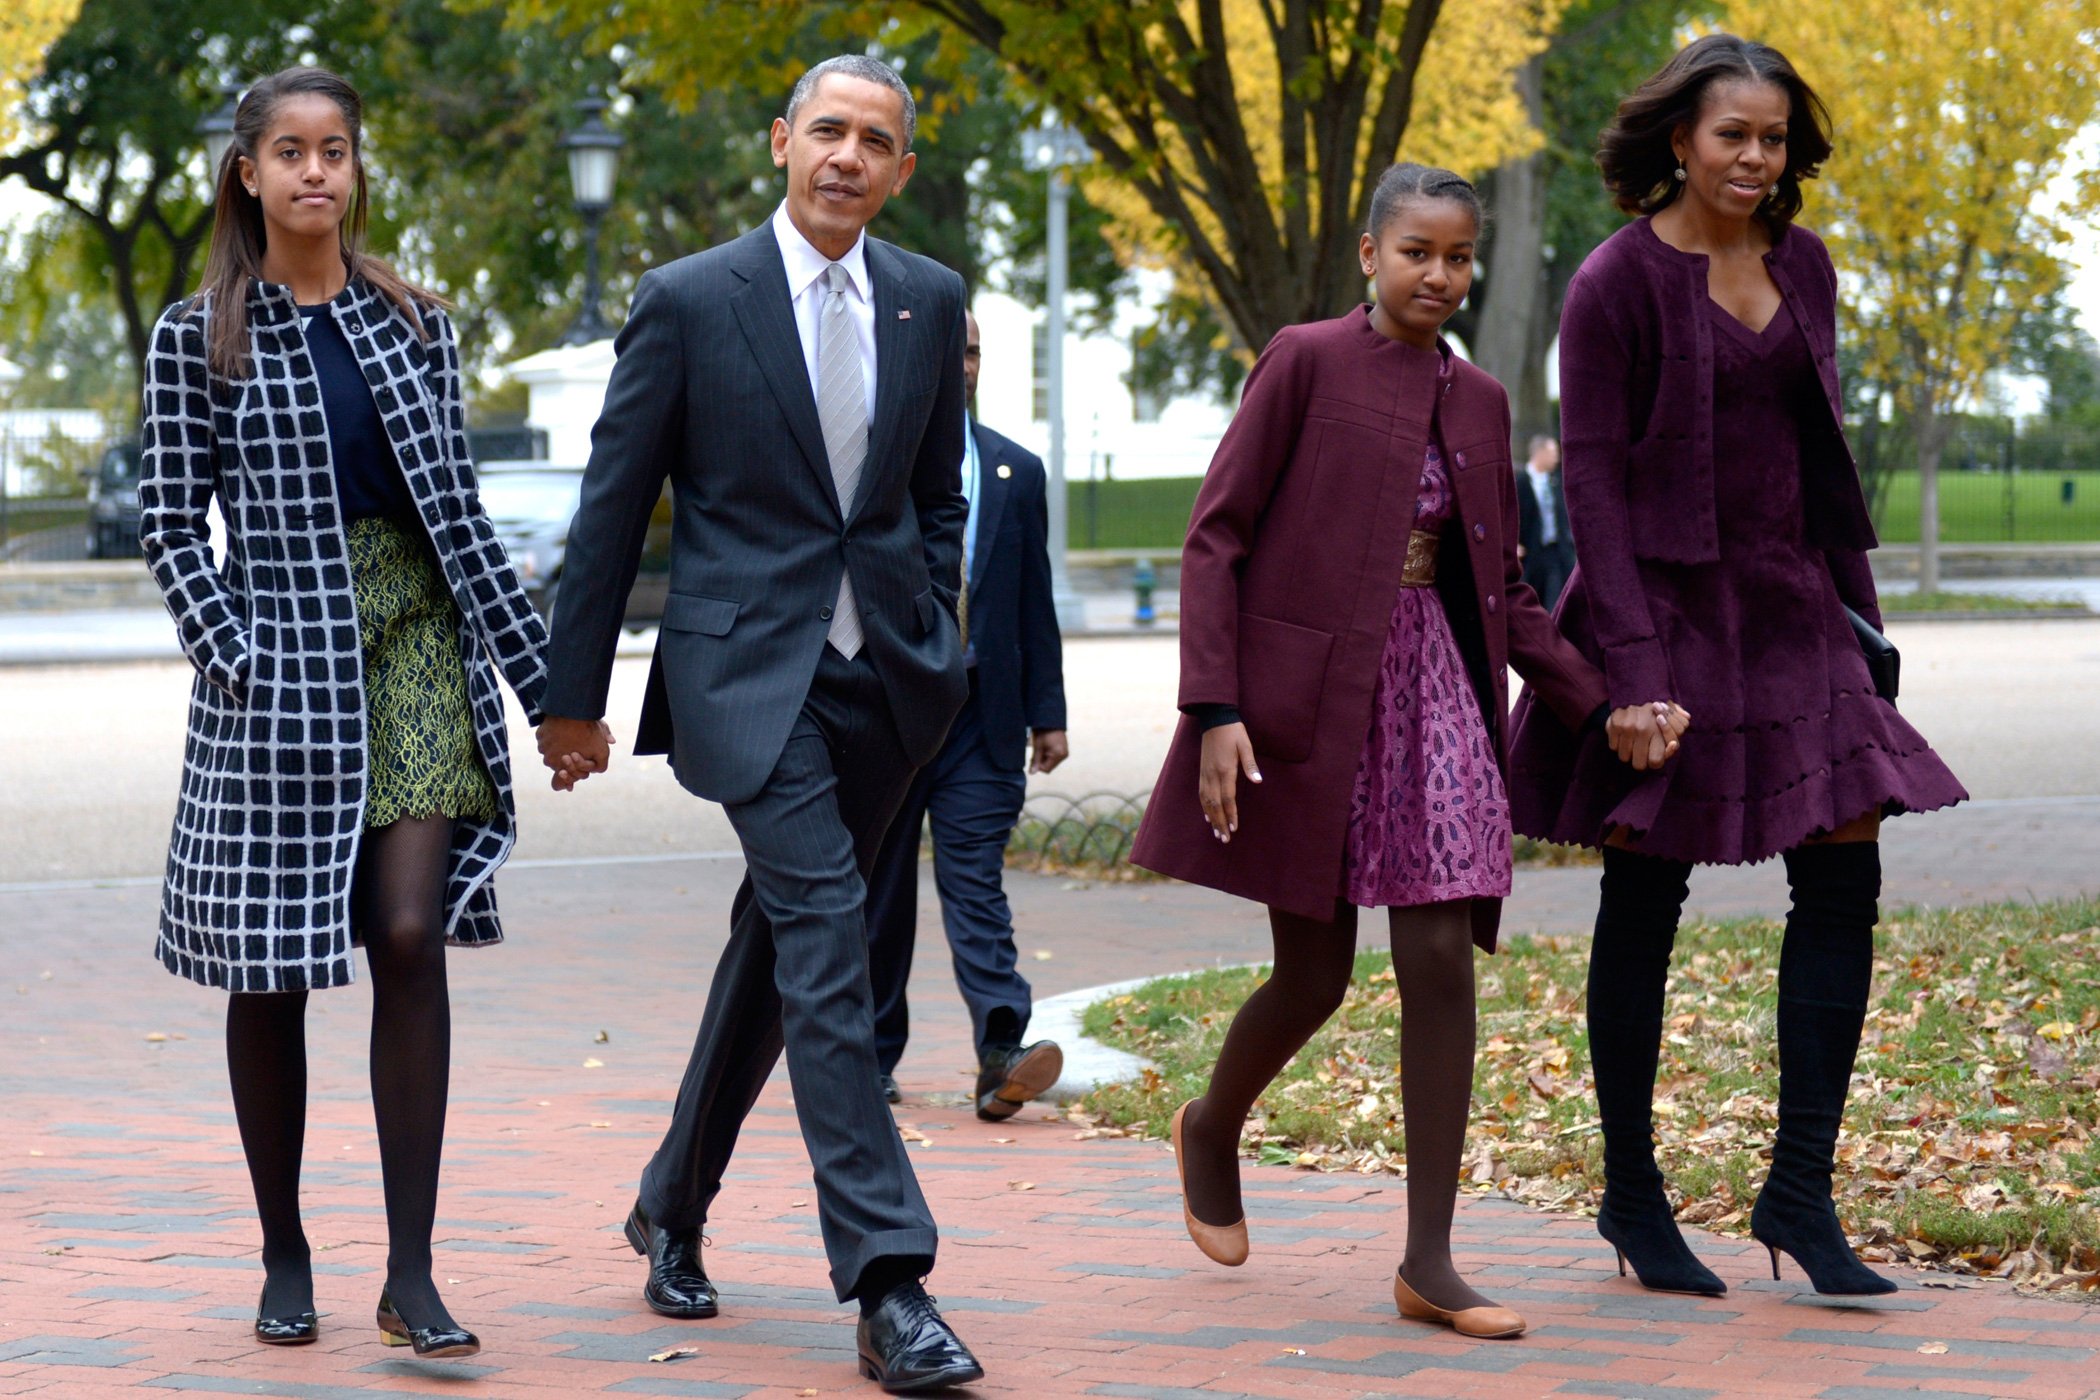 Oct. 27, 2013 President Barack Obama walks with his wife Michelle Obama and daughters Malia Obama and Sasha Obama through Lafayette Park to St John's Church to attend service in Washington.